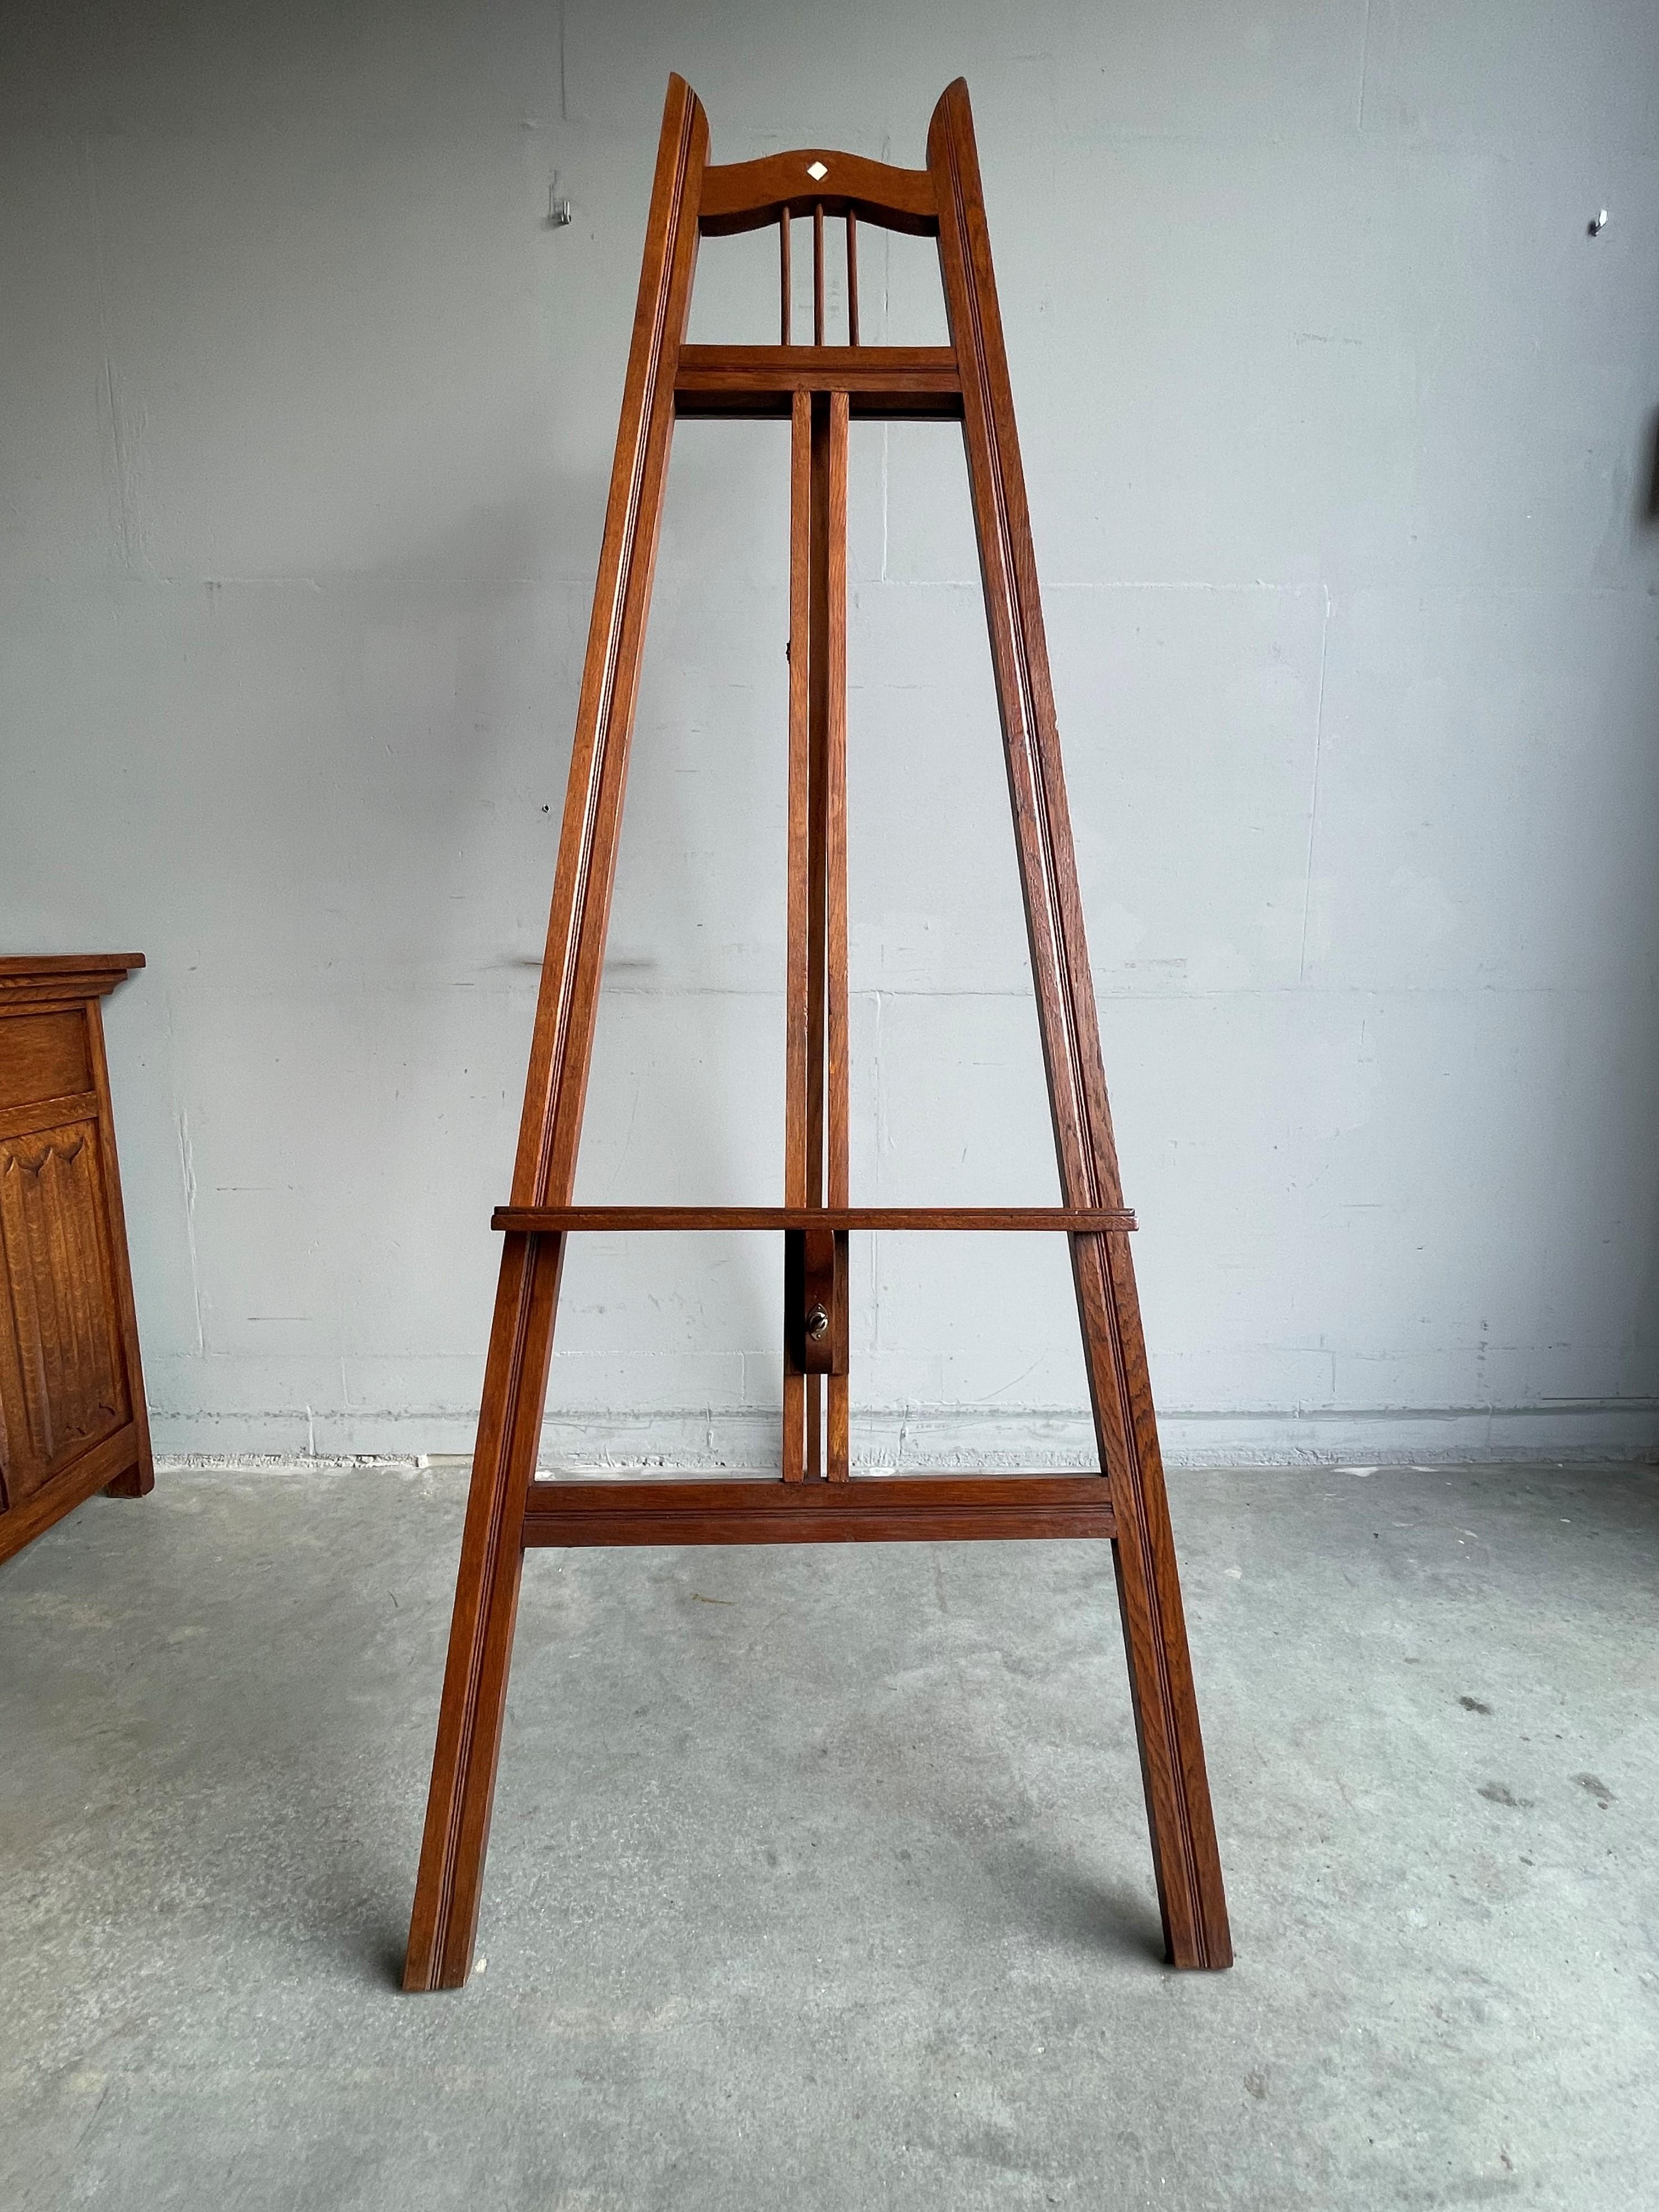 Good size and excellent condition antique gallery presentation stand.

This beautiful gallery easel from the early 1900s is a joy to look at, even when there is no picture displayed on it. Thanks to the solid oakwooden structure and the three